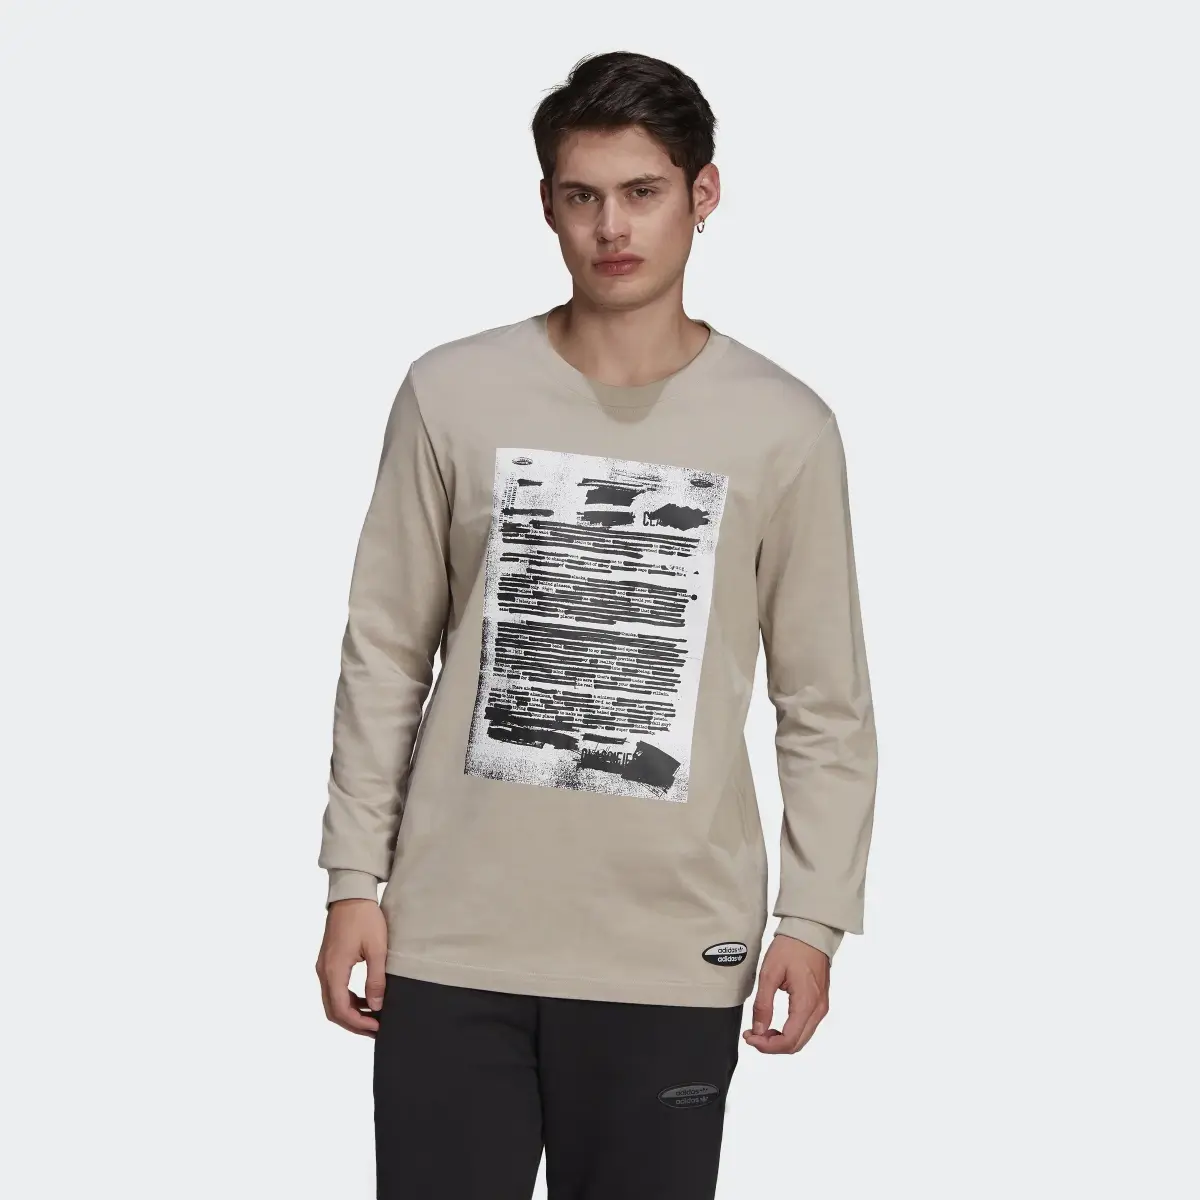 Adidas R.Y.V. Graphic Long-Sleeve Top. 2